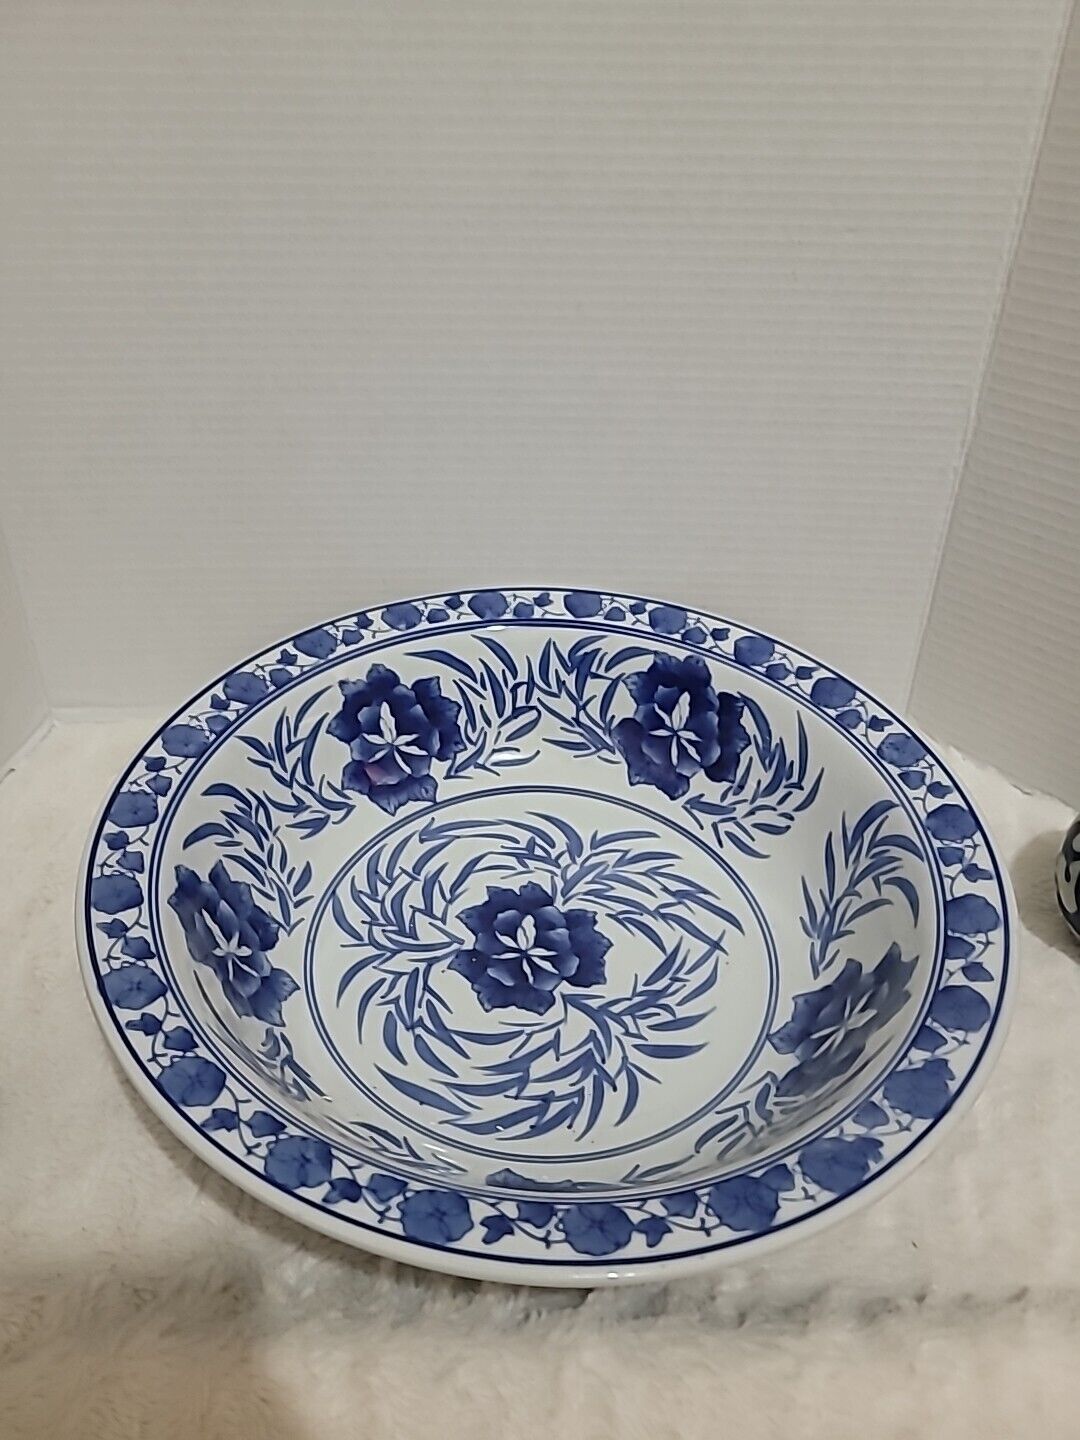 Vintage Blue And White Bowl With Chinoiserie Carpet Balls